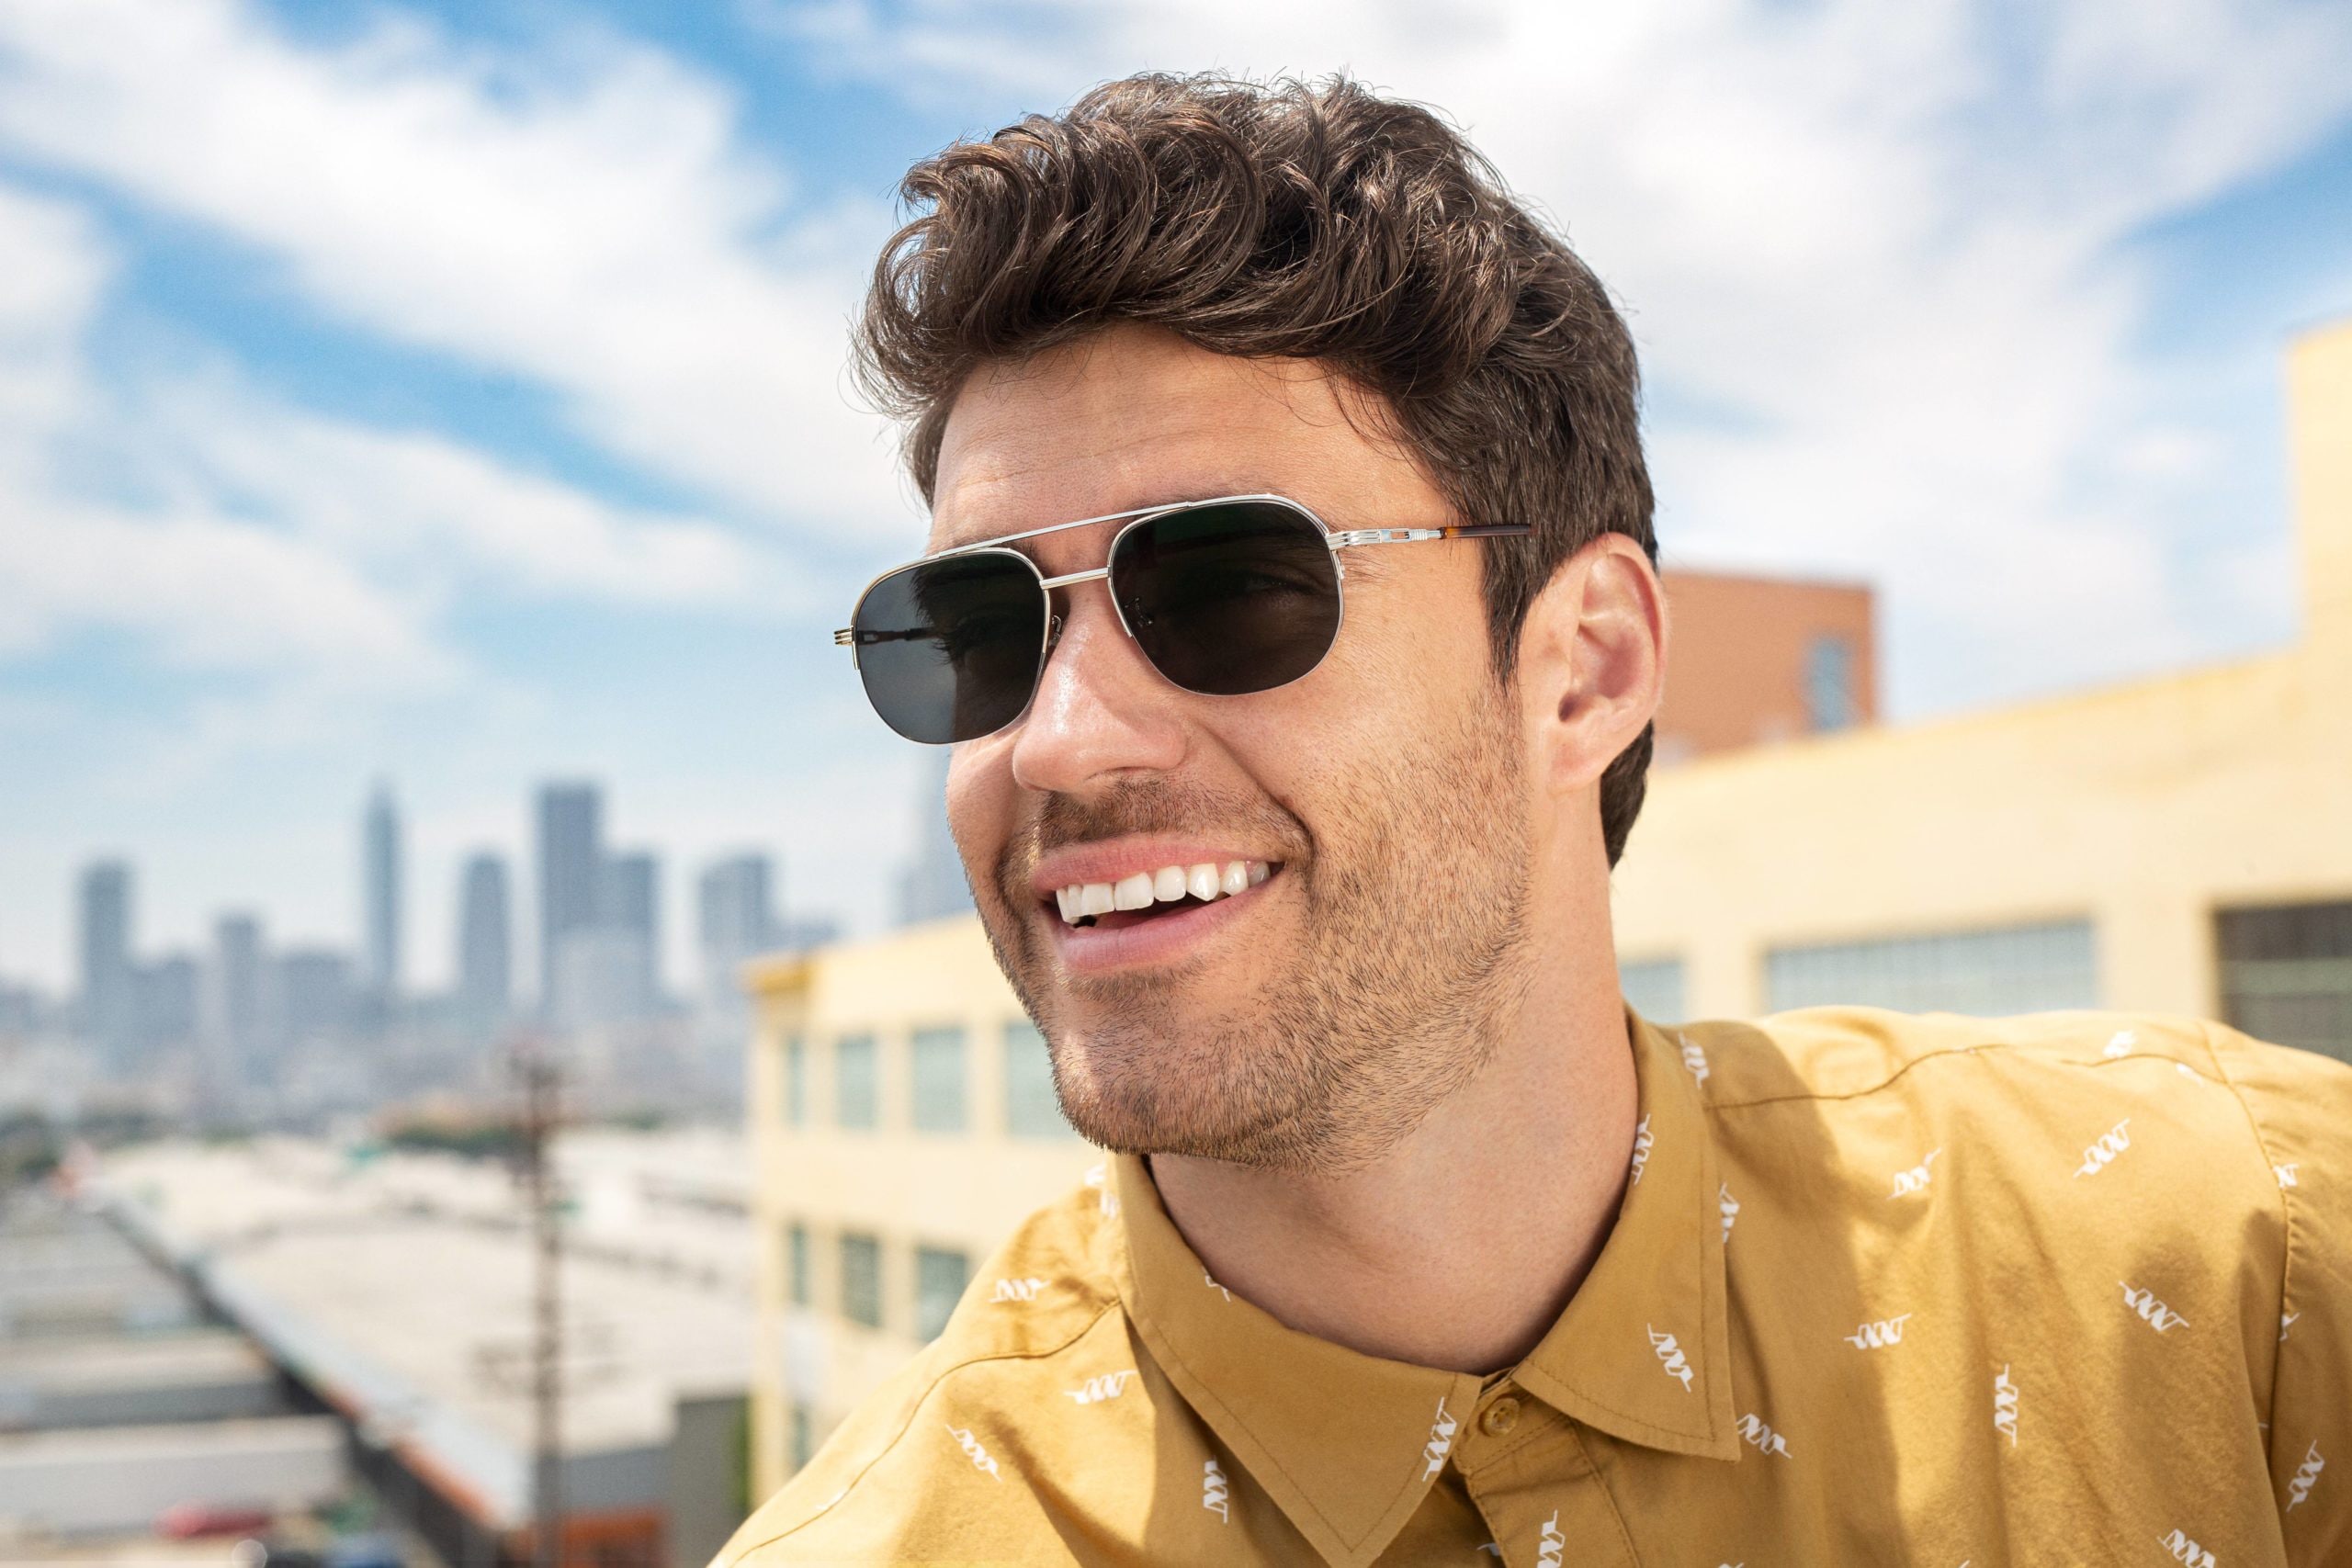 A man wearing prescription sunglasses with a city in the background